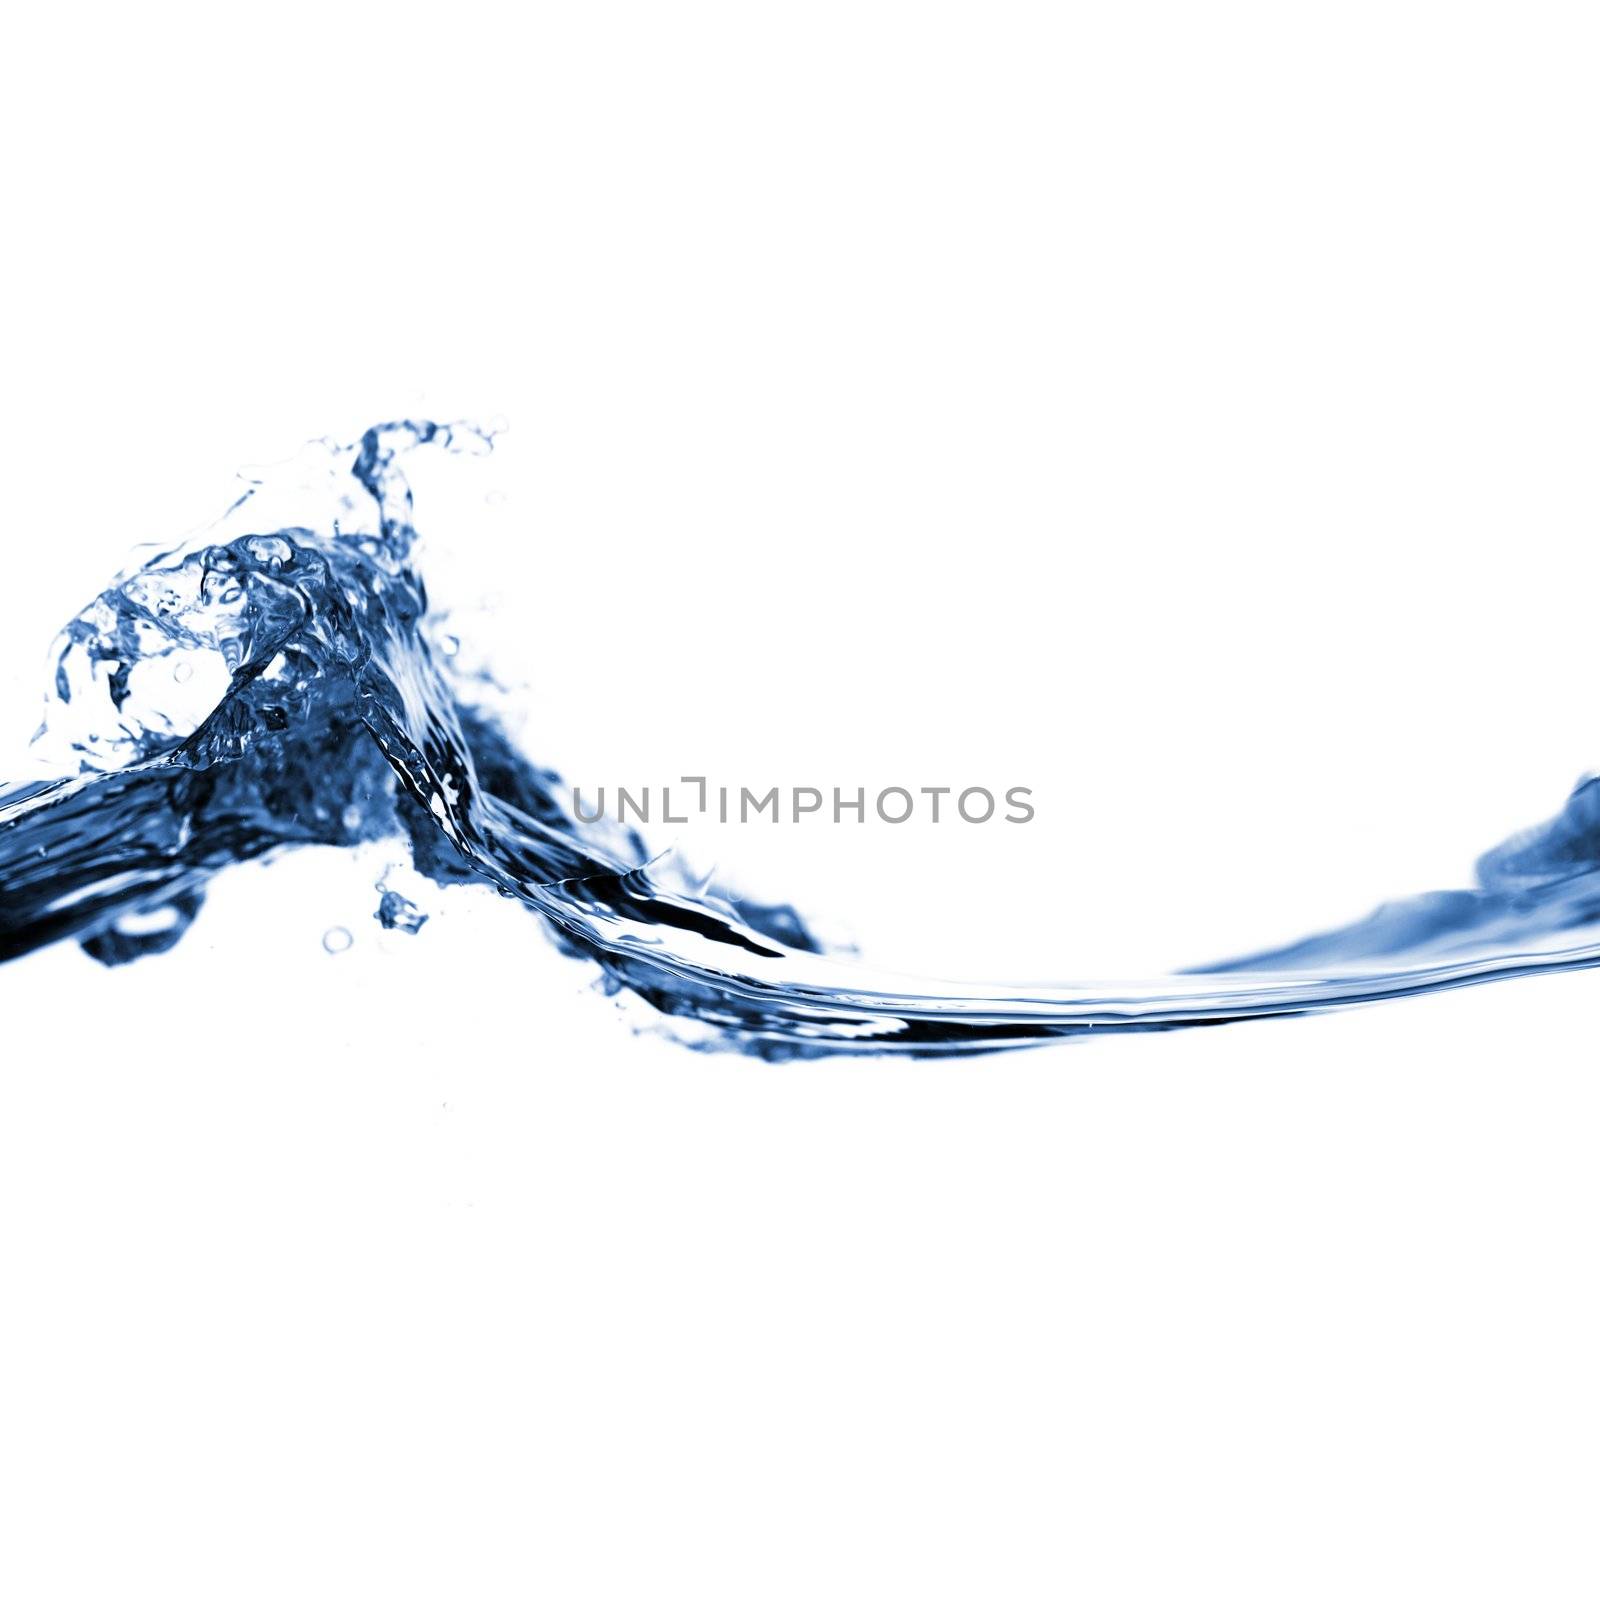 Crisp, clear, refreshing water against a white background.